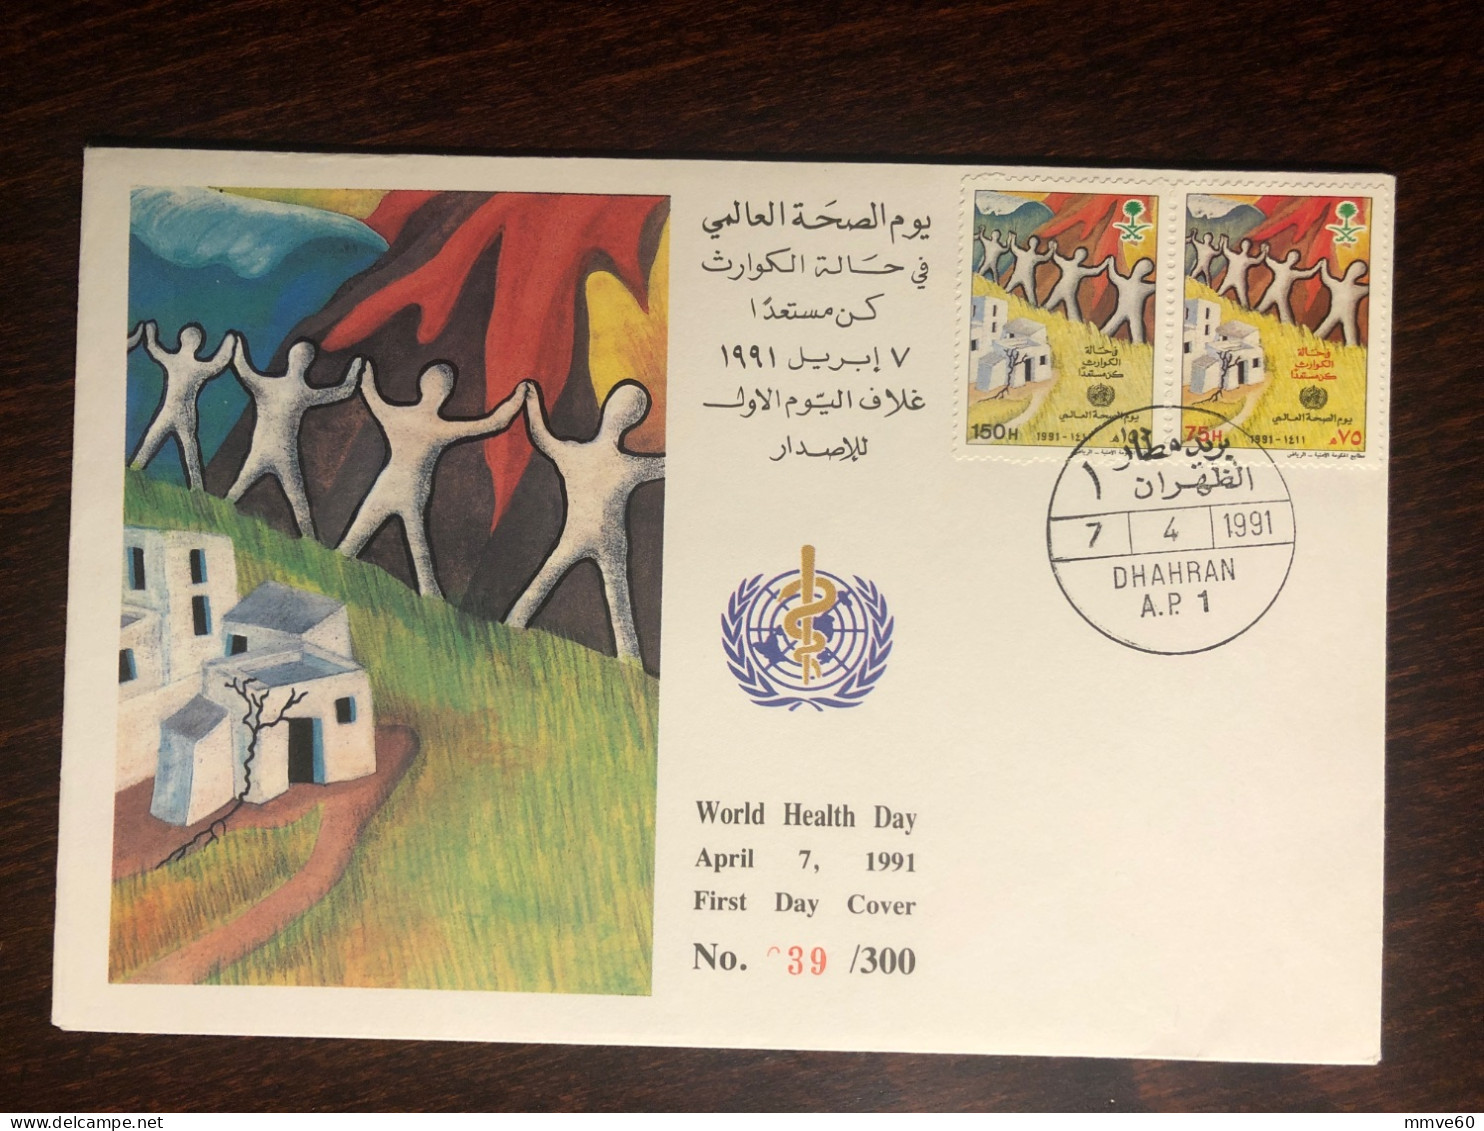 SAUDI ARABIA FDC COVER ONLY 300 ISSUED 1991 YEAR WHO HEALTH MEDICINE STAMPS - Saoedi-Arabië